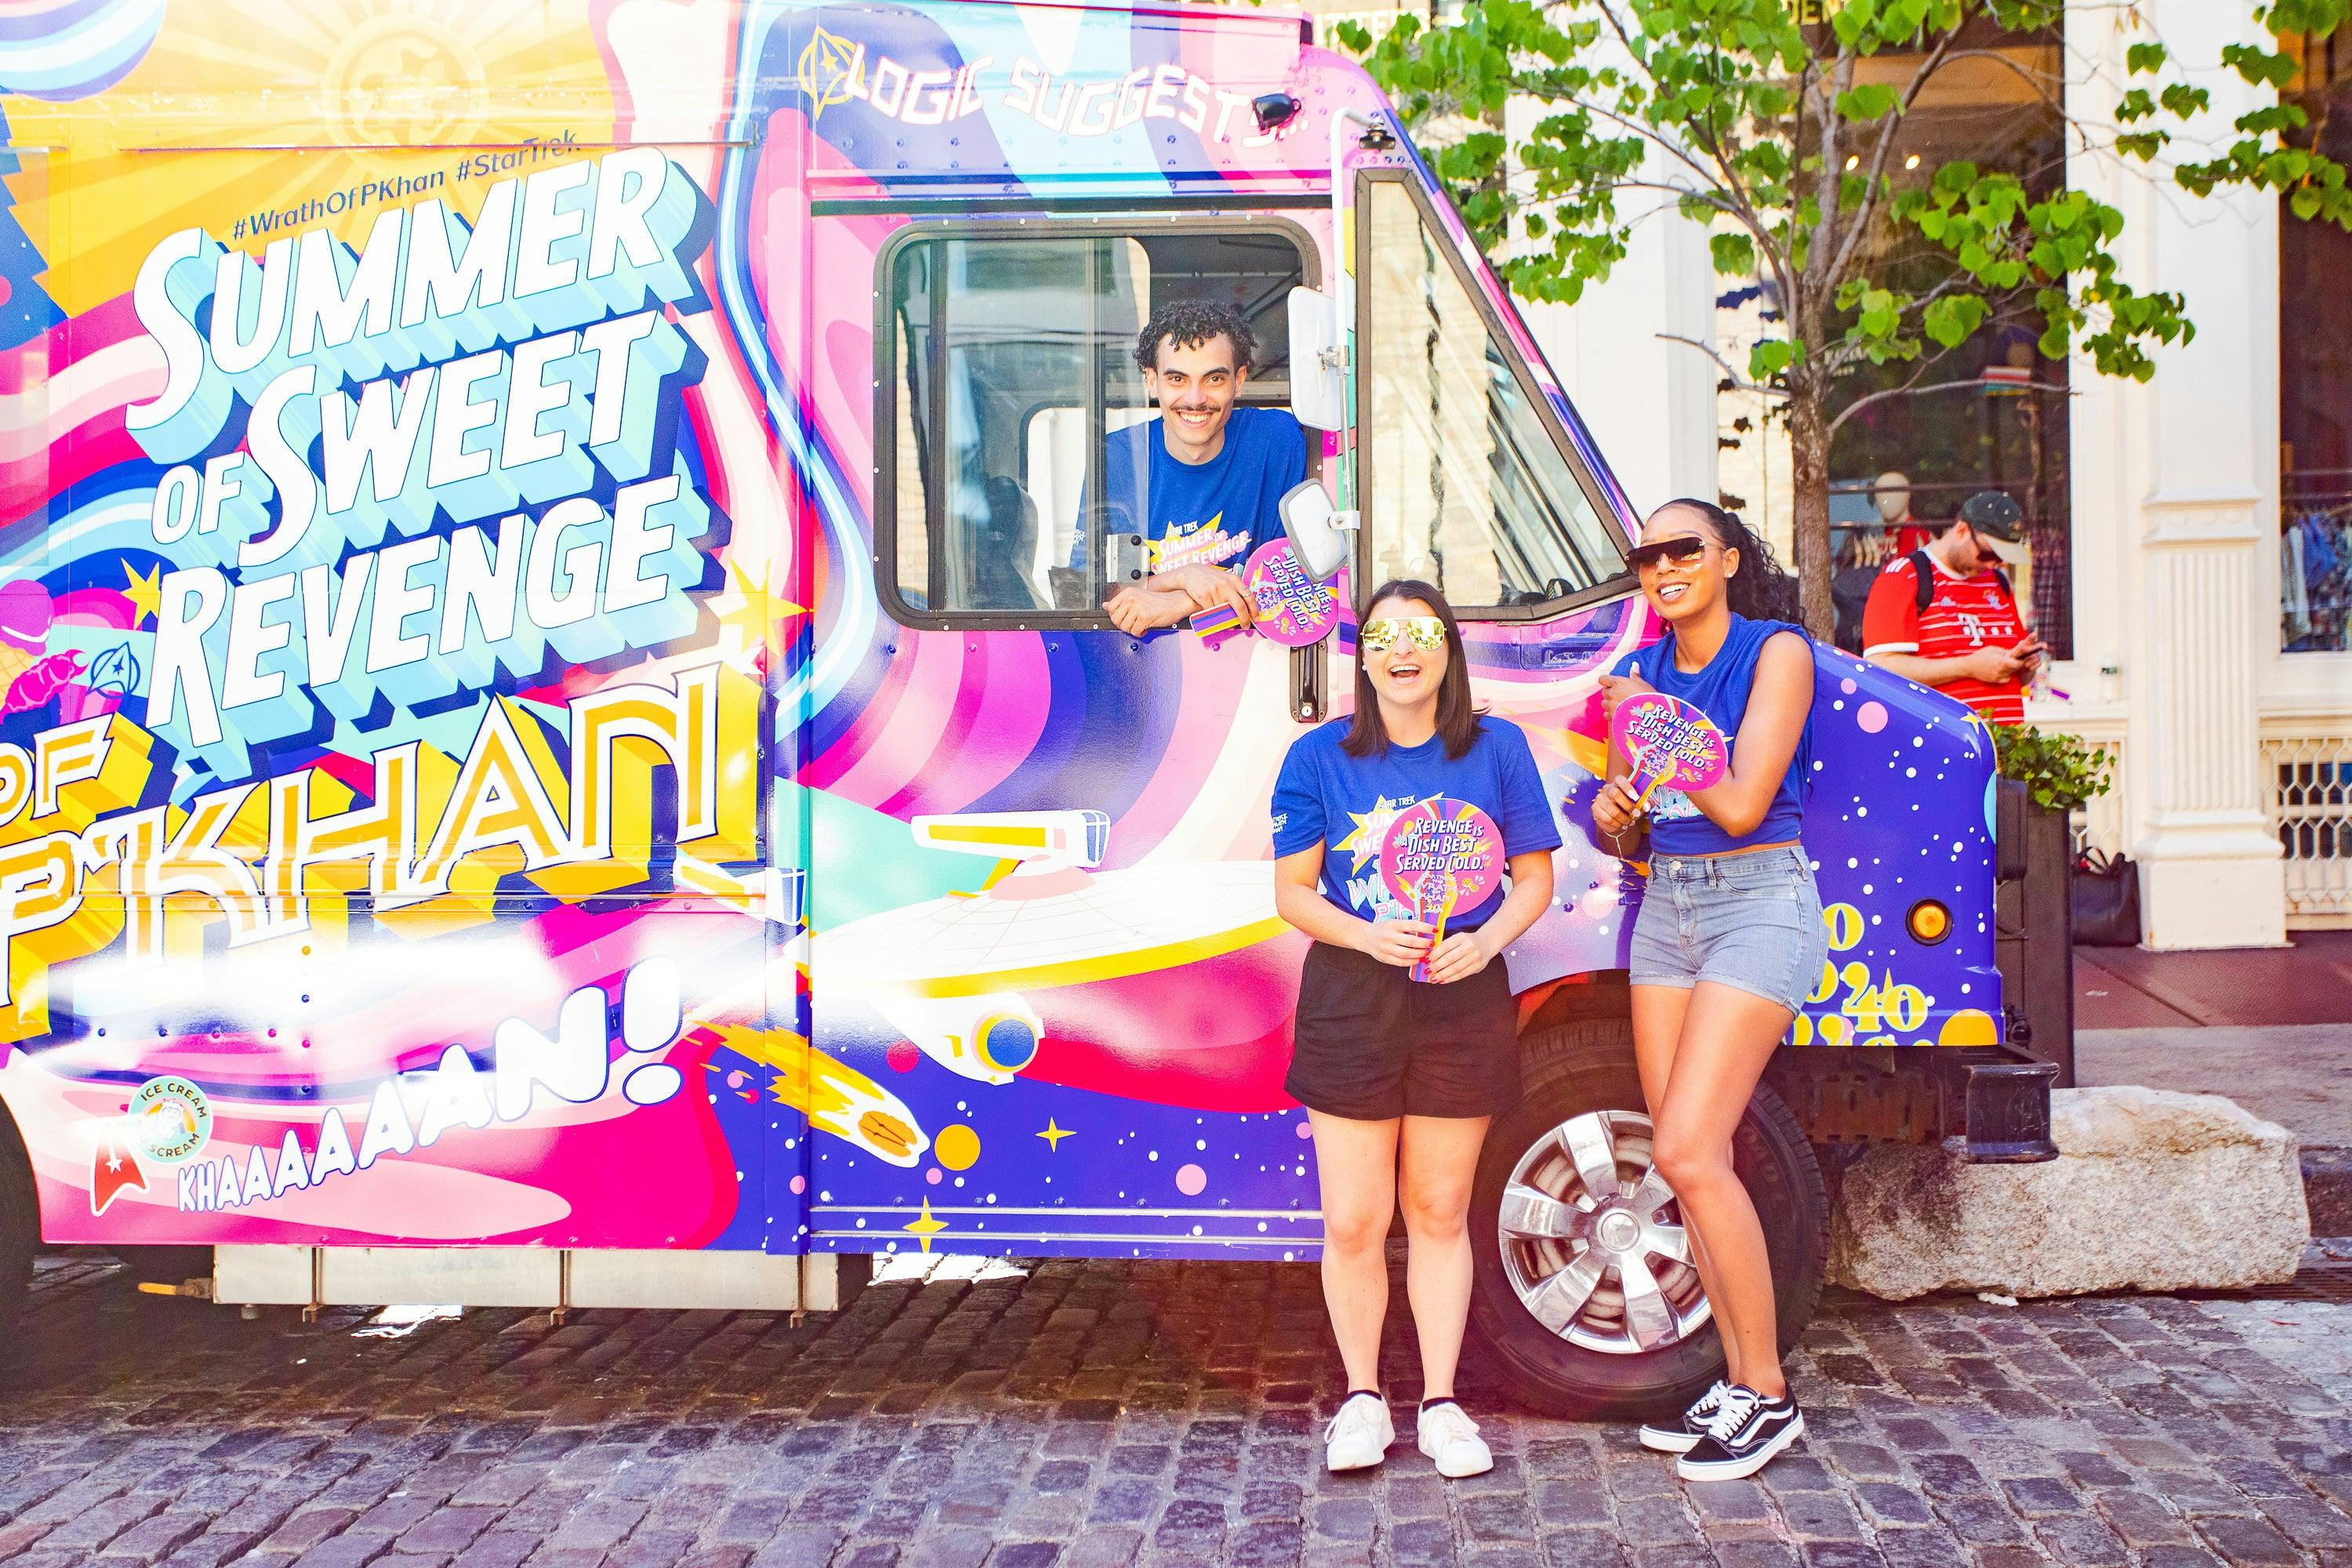 The three workers who served ice cream pose next to the truck. They are wearing blue shirts that have "The Summer of Sweet Revenge" and "The Wrath of P'Khan" on them, and are holding paper fans.